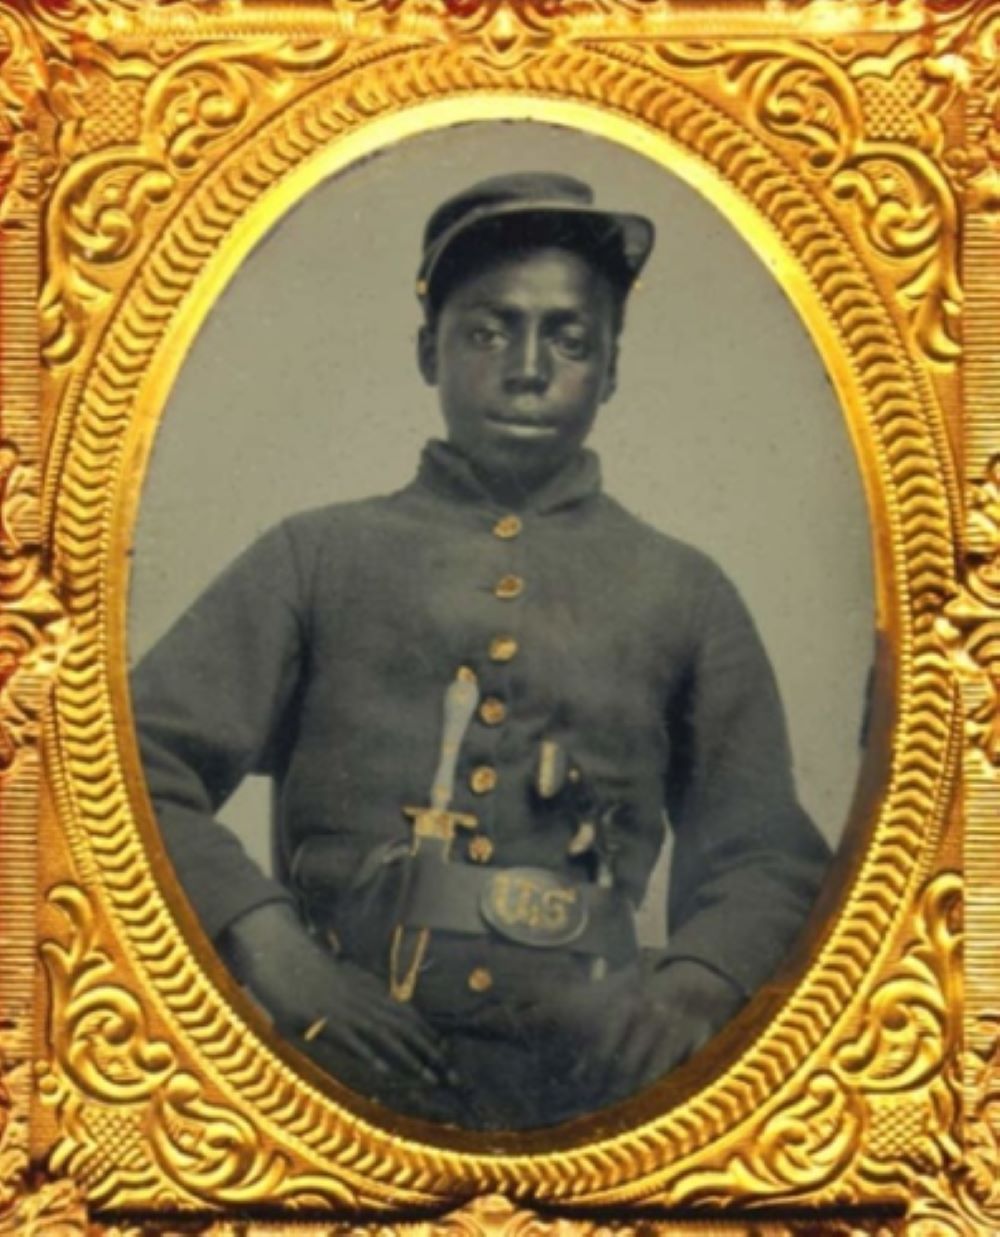 USCT Soldier from Ross J. Kelbaugh Collection